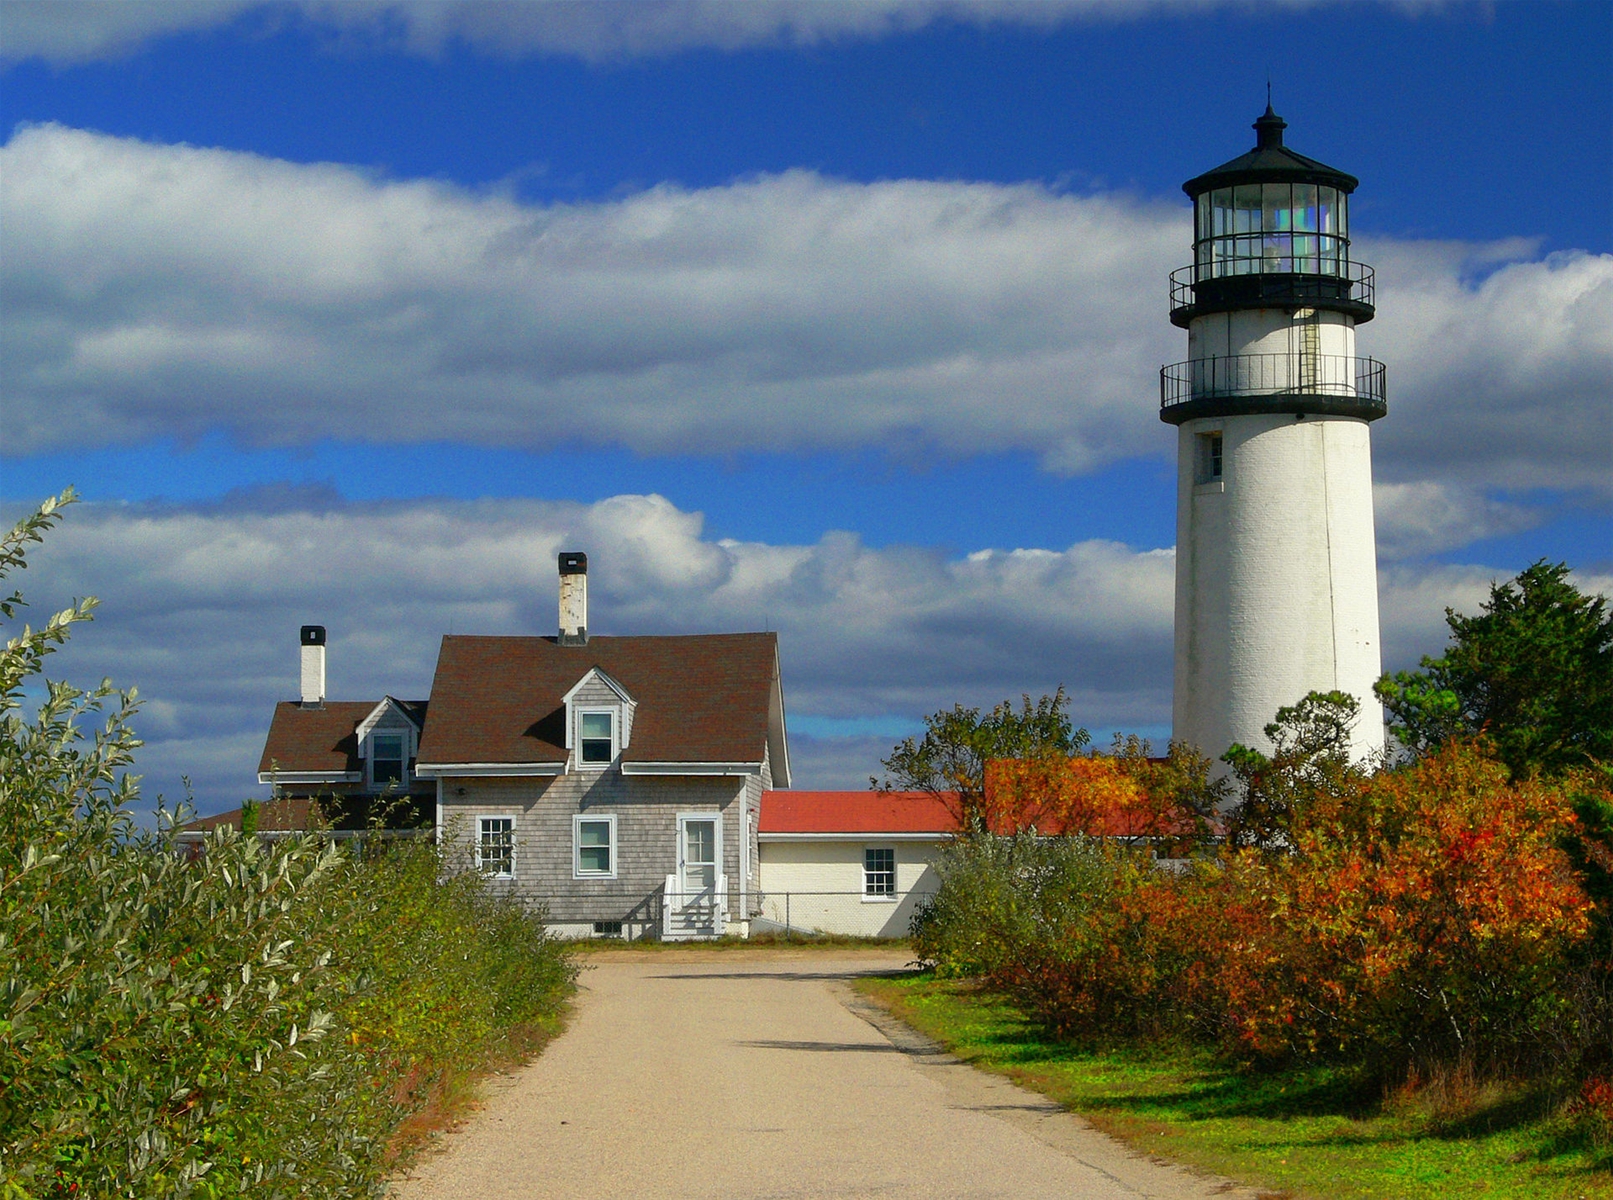 Highland Lighthouse in Truro is a popular historical destination on the Outer Cape during rainy days